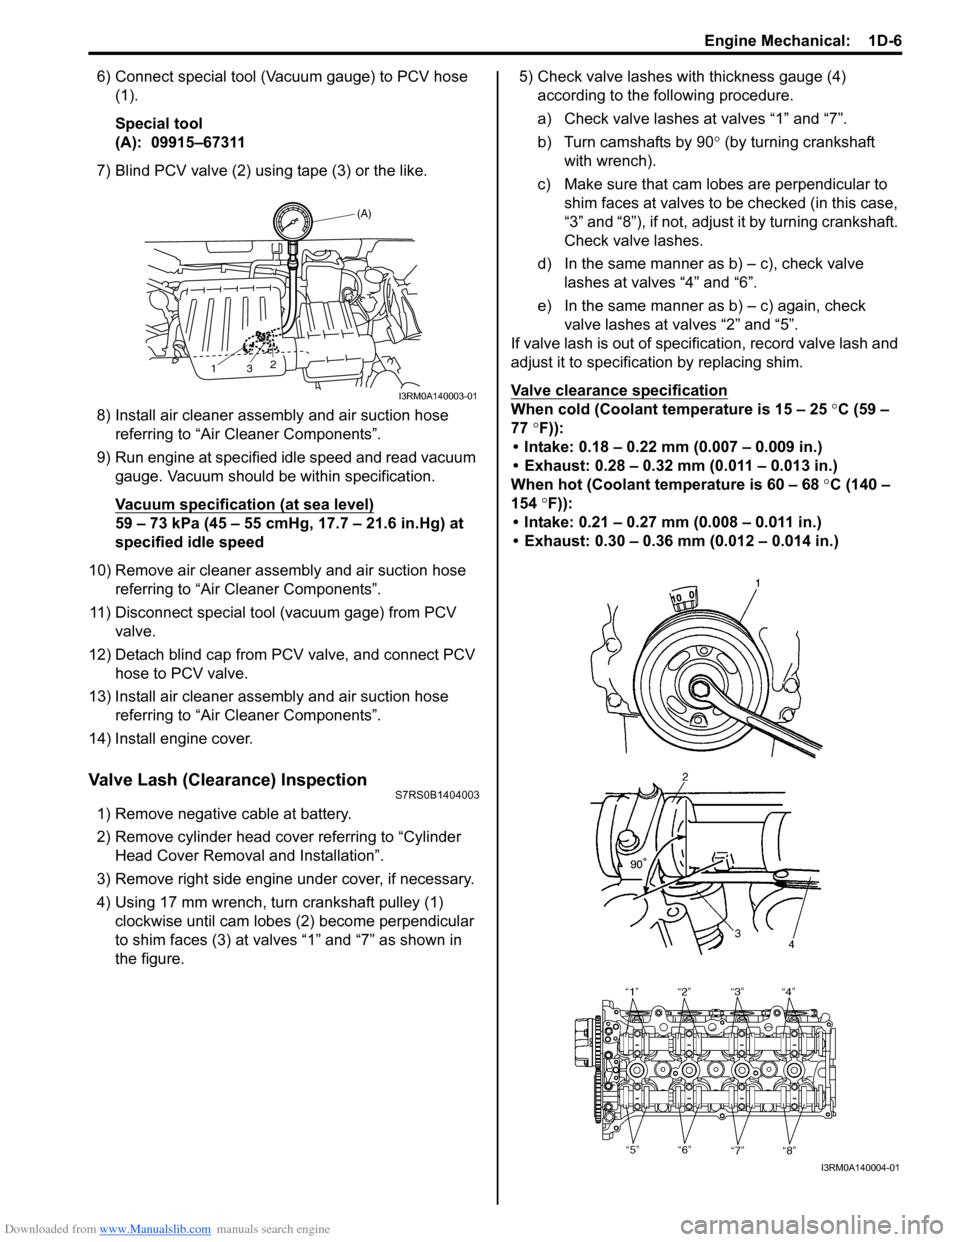 SUZUKI SWIFT 2007 2.G Service Workshop Manual Downloaded from www.Manualslib.com manuals search engine Engine Mechanical:  1D-6
6) Connect special tool (Vacuum gauge) to PCV hose (1).
Special tool
(A):  09915–67311
7) Blind PCV valve (2) using 